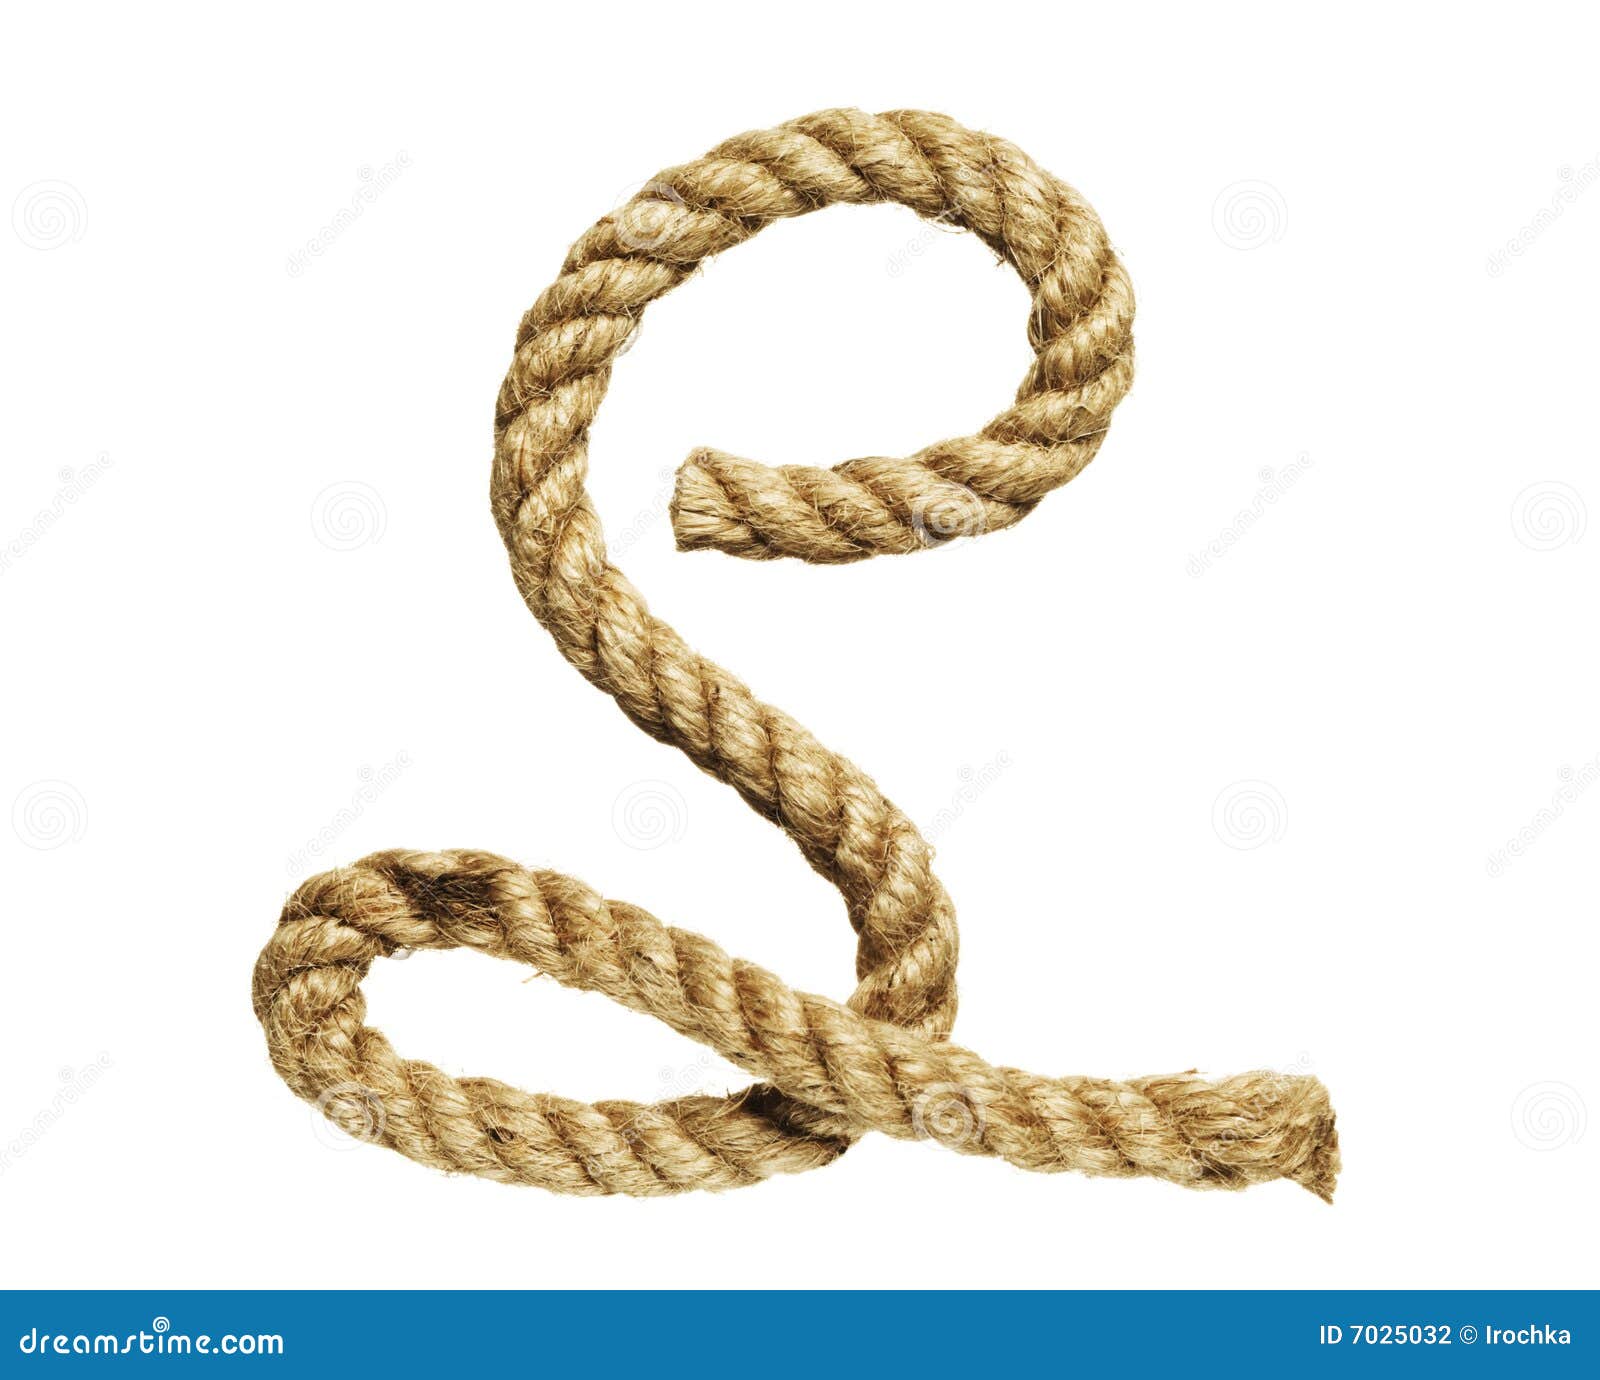 rope forming letter c